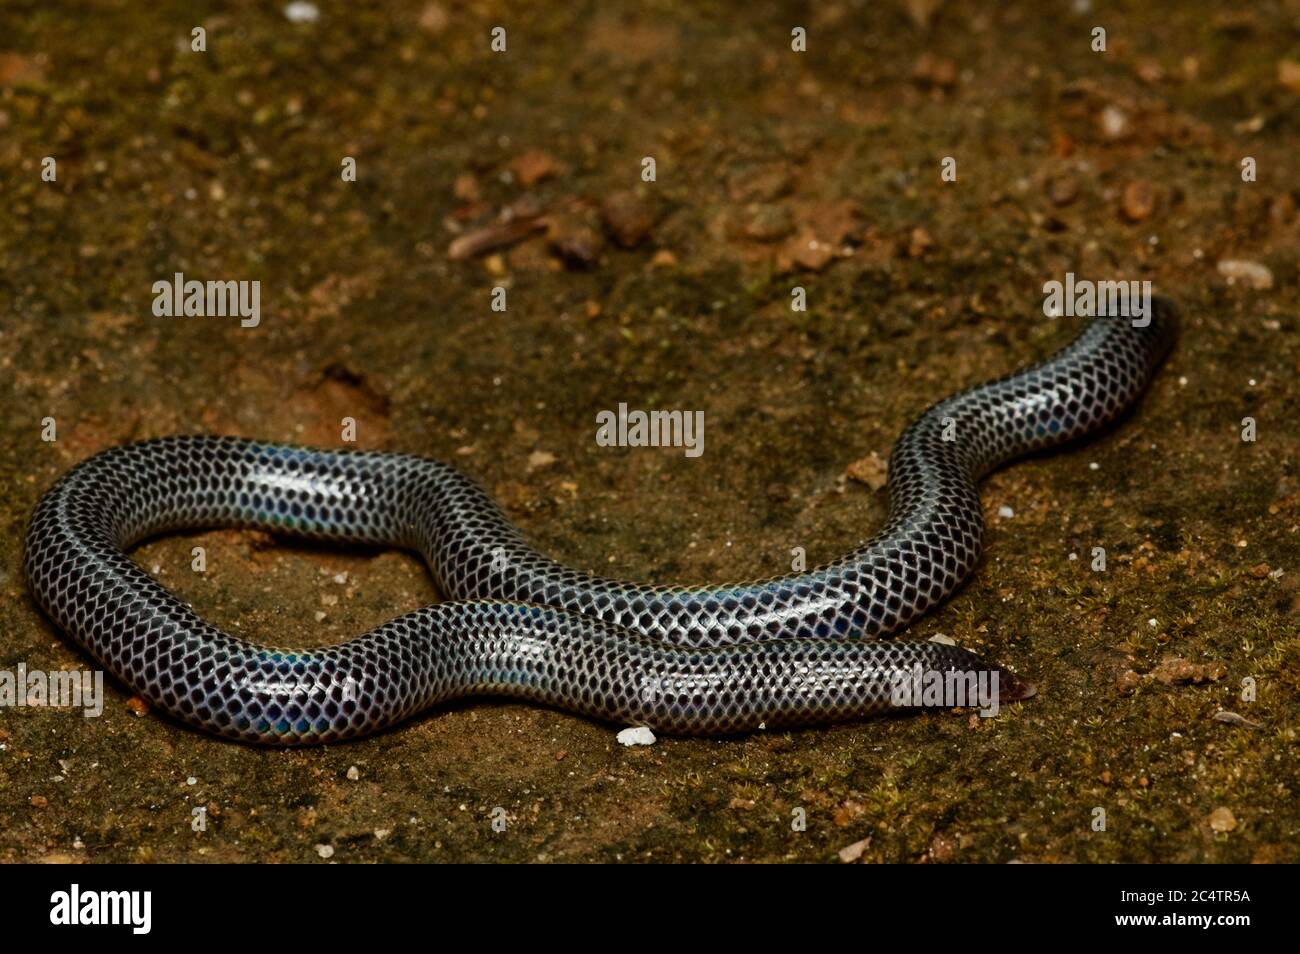 A Cuvier's Earth Snake (Rhinophis philippinus) on sandy ground near Knuckles Forest Reserve, Sri Lanka Stock Photo